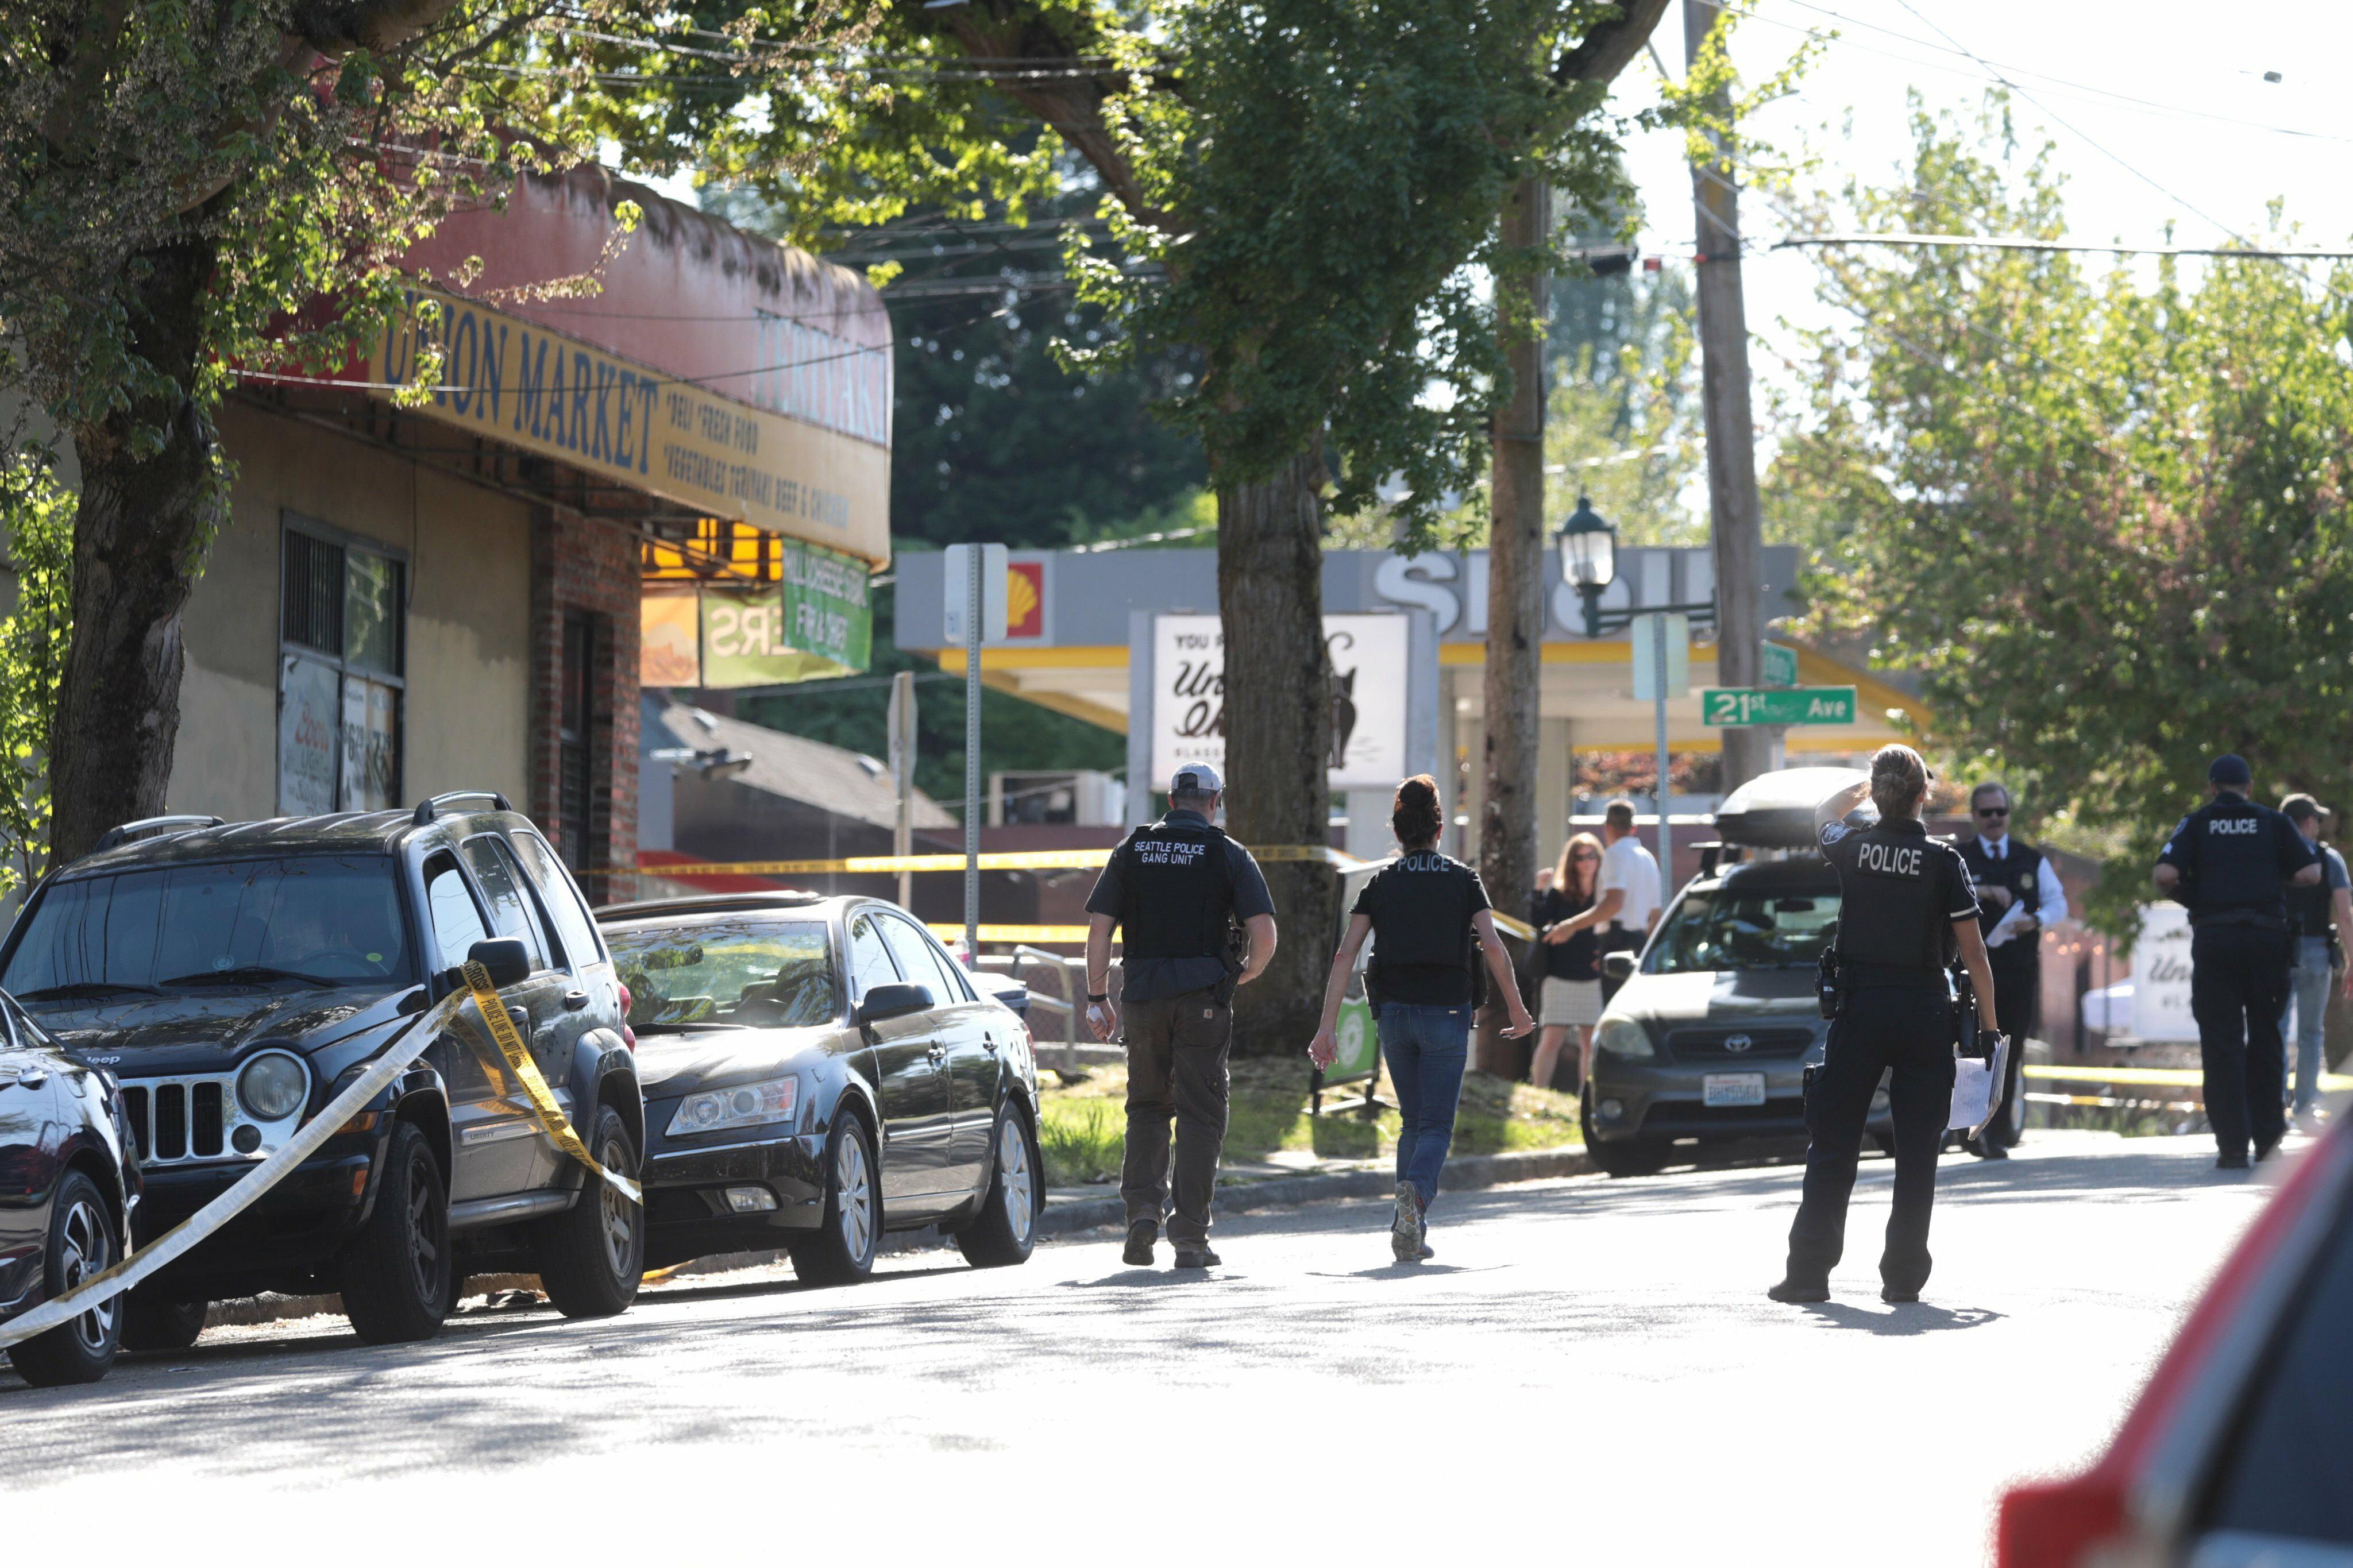 Seattle shooting leaves 1 dead, 2 injured | The Spokesman-Review4096 x 2730